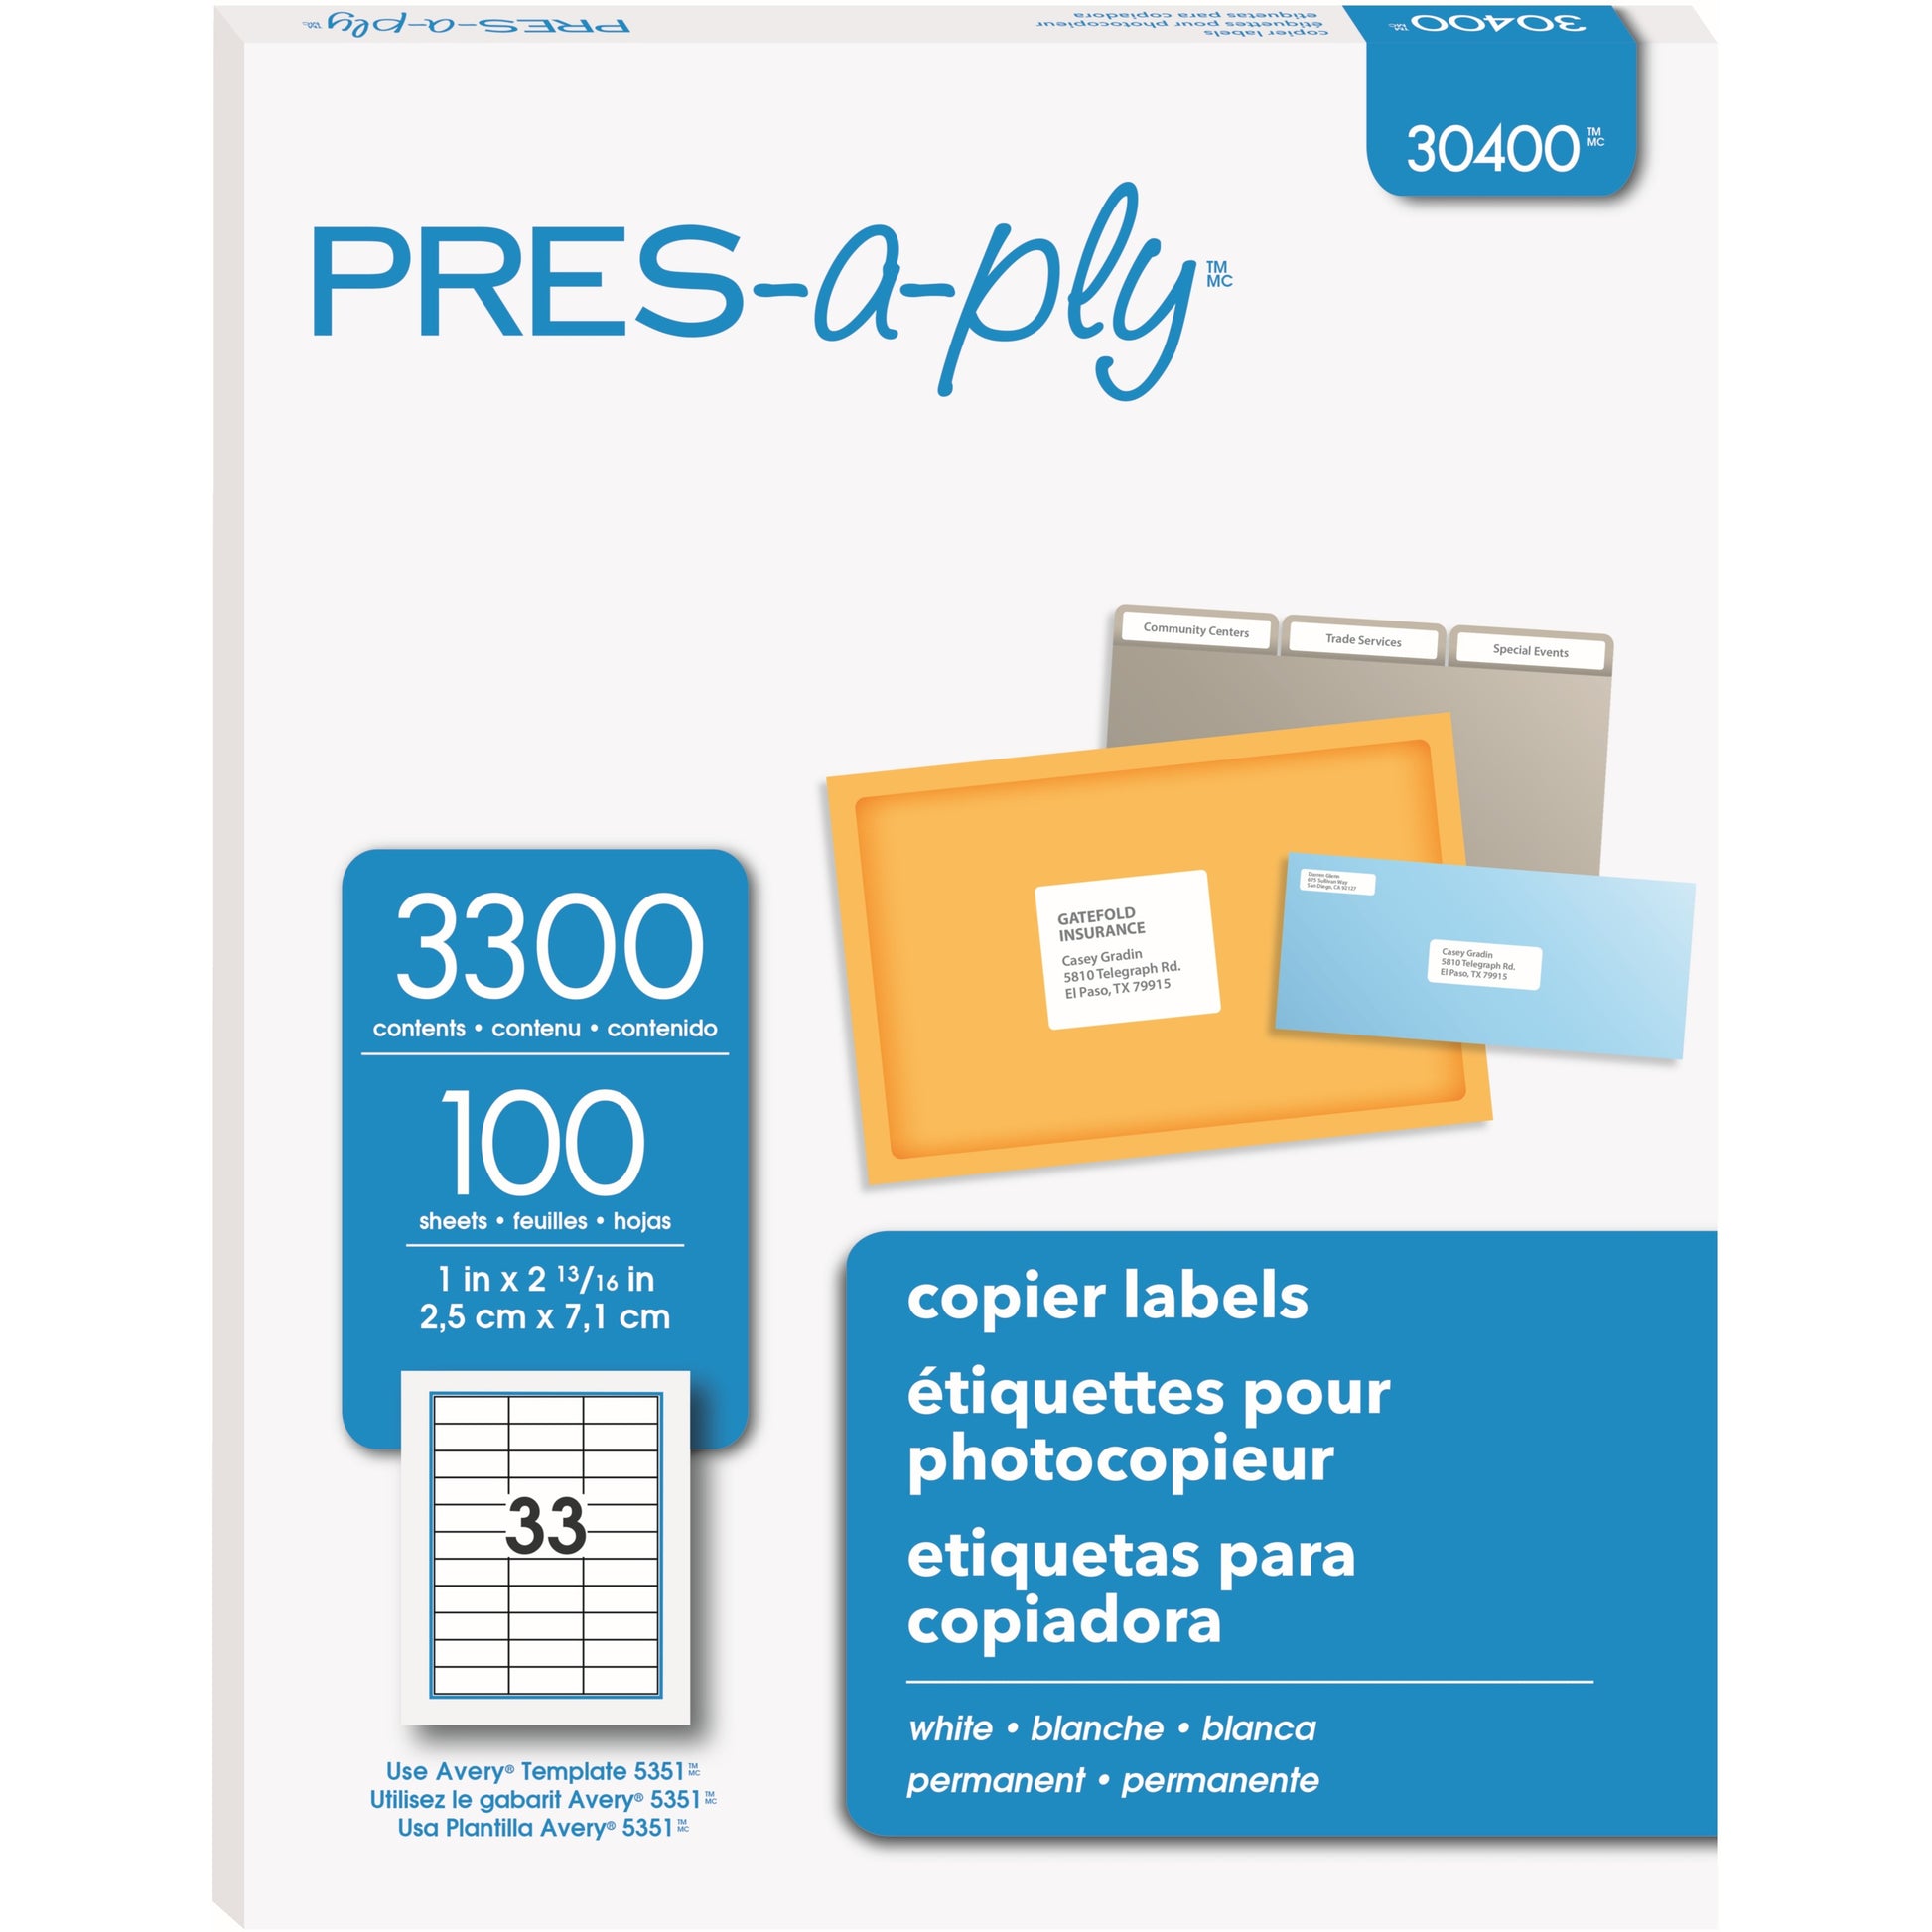 PRES-a-ply Labels for Copiers, 1" x 2-13/16" , Permanent-Adhesive, 33-up, 3300 labels